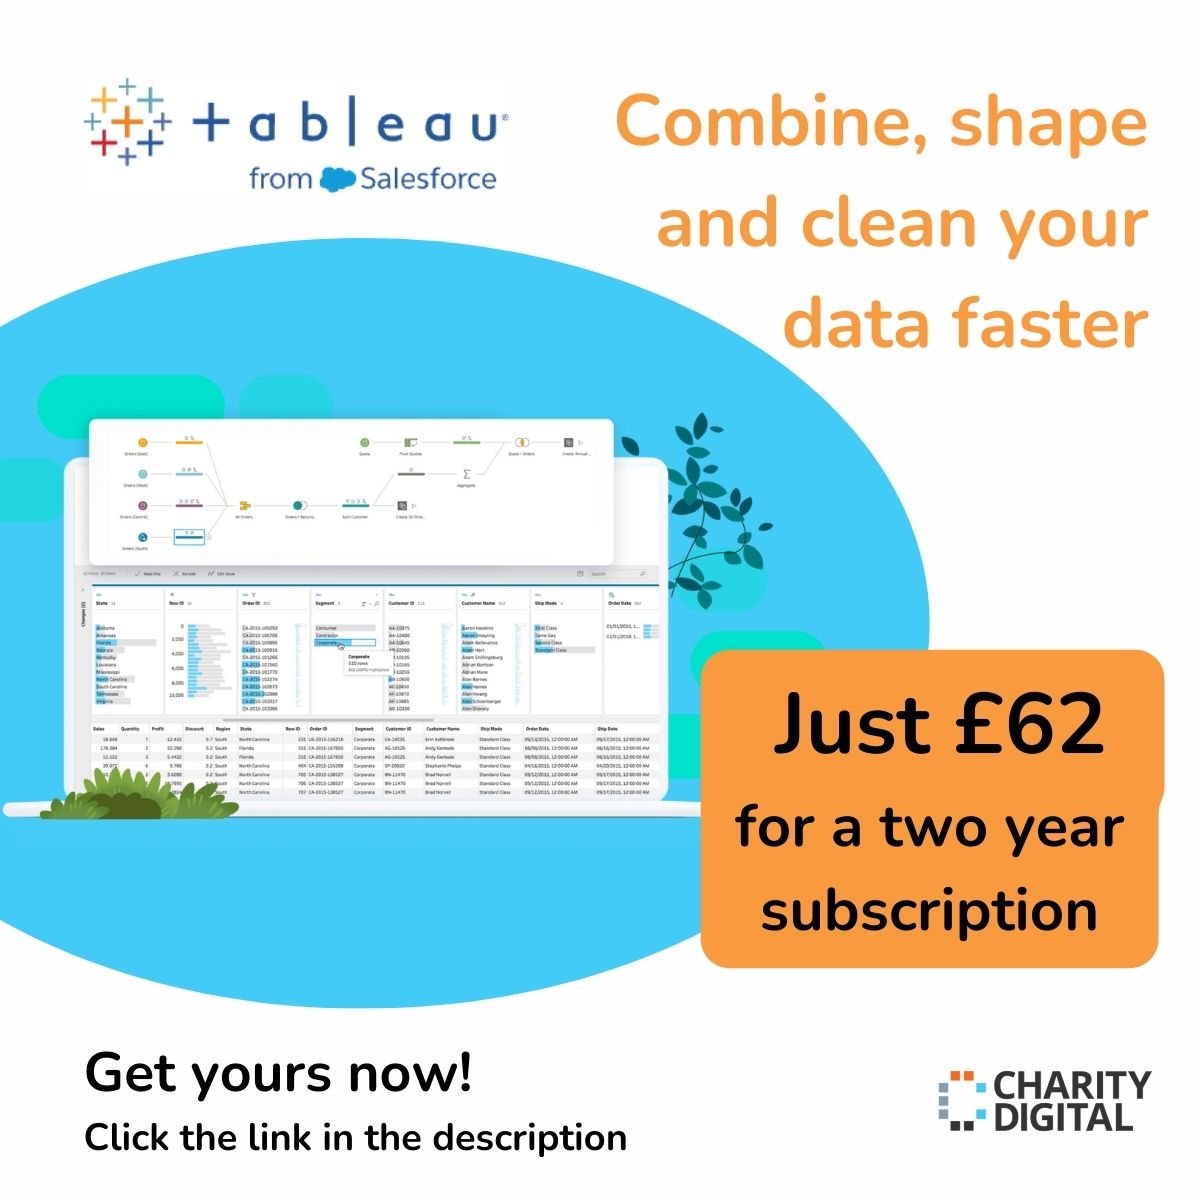 Ready to take your data analysis to the next level? Learn more about Tableau Desktop and Tableau Prep Builder today ⬇️ charitydigitalexchange.org/content/tablea… #CharityDigital #DataAnalytics #Tableau